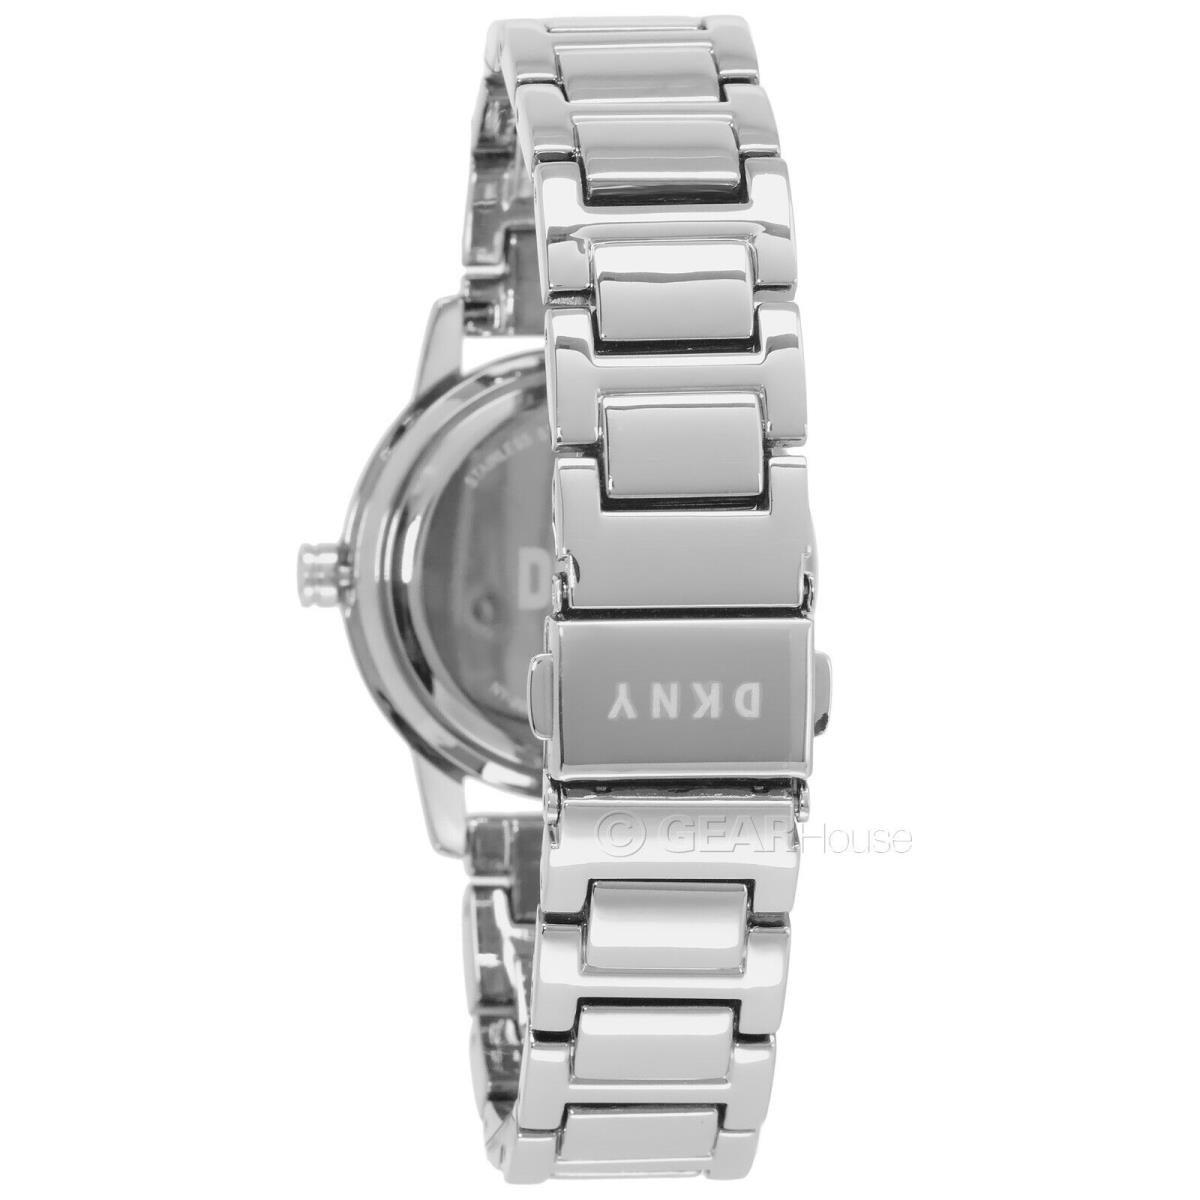 Dkny Tompkins Womens Casual Watch White Dial Silver Stainless Steel Band